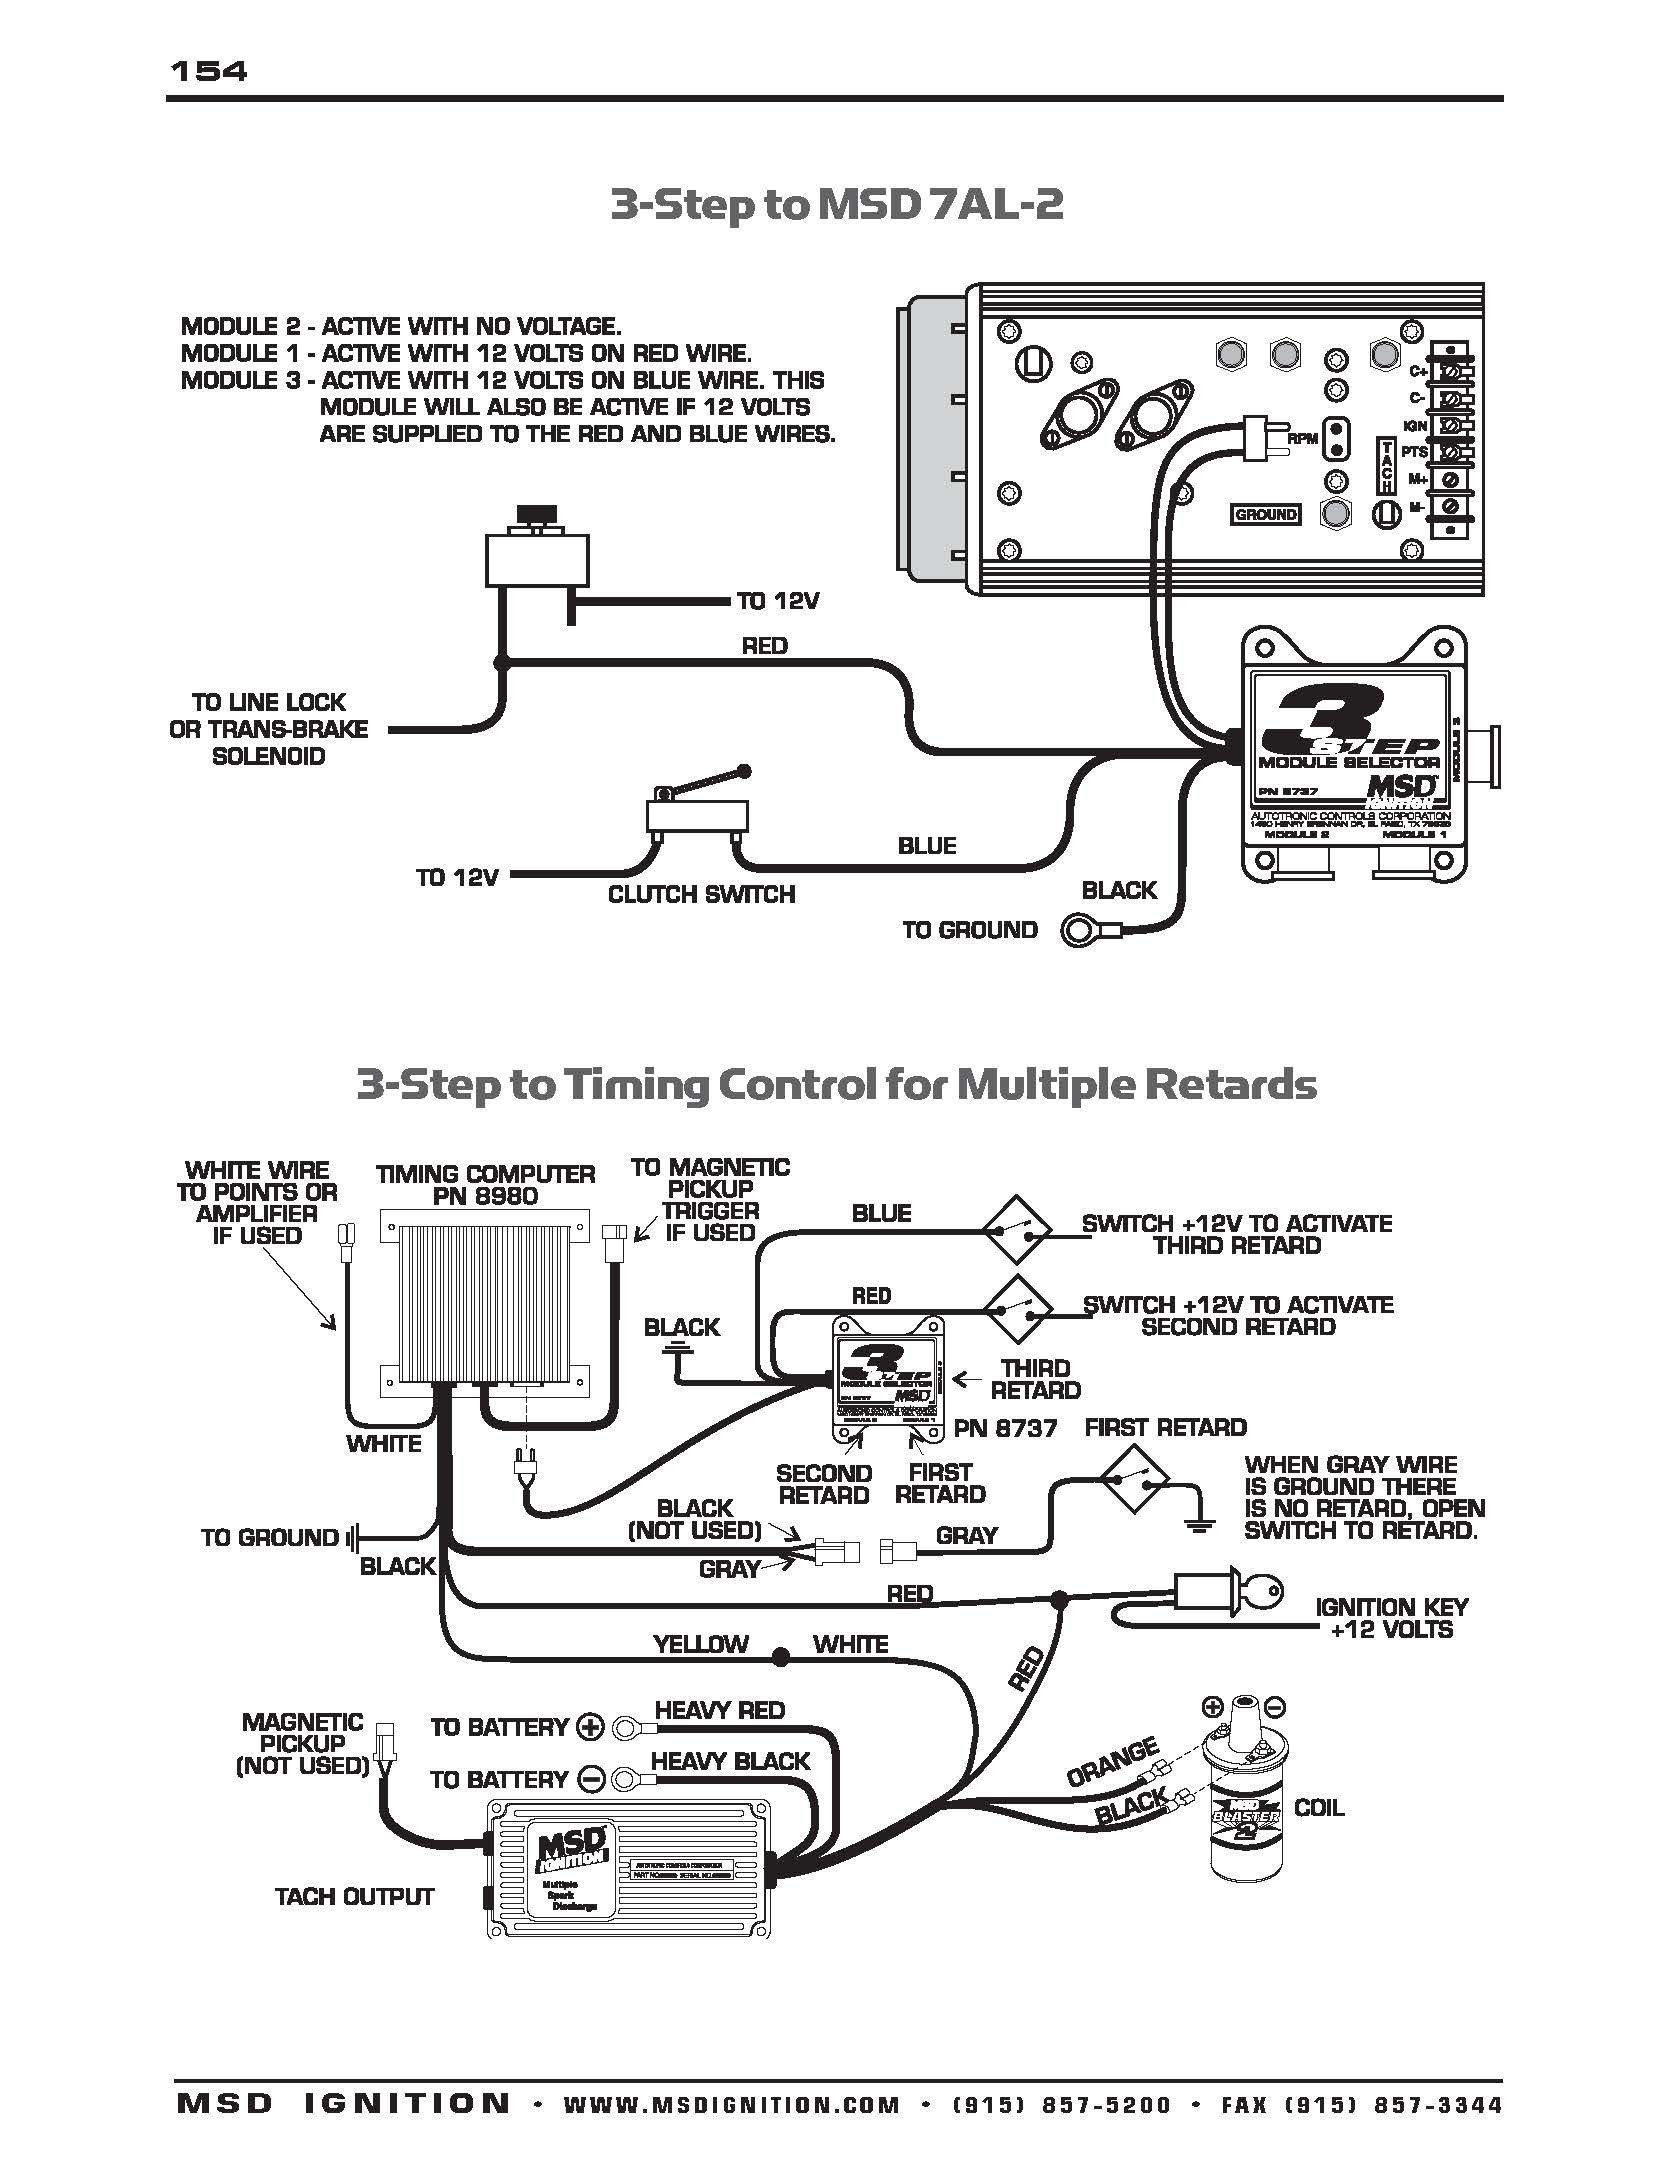 Wiring Diagram the Ignition System Inspirationa Msd Ignition System Wiring Diagram Inspirationa Msd Ignition Wiring